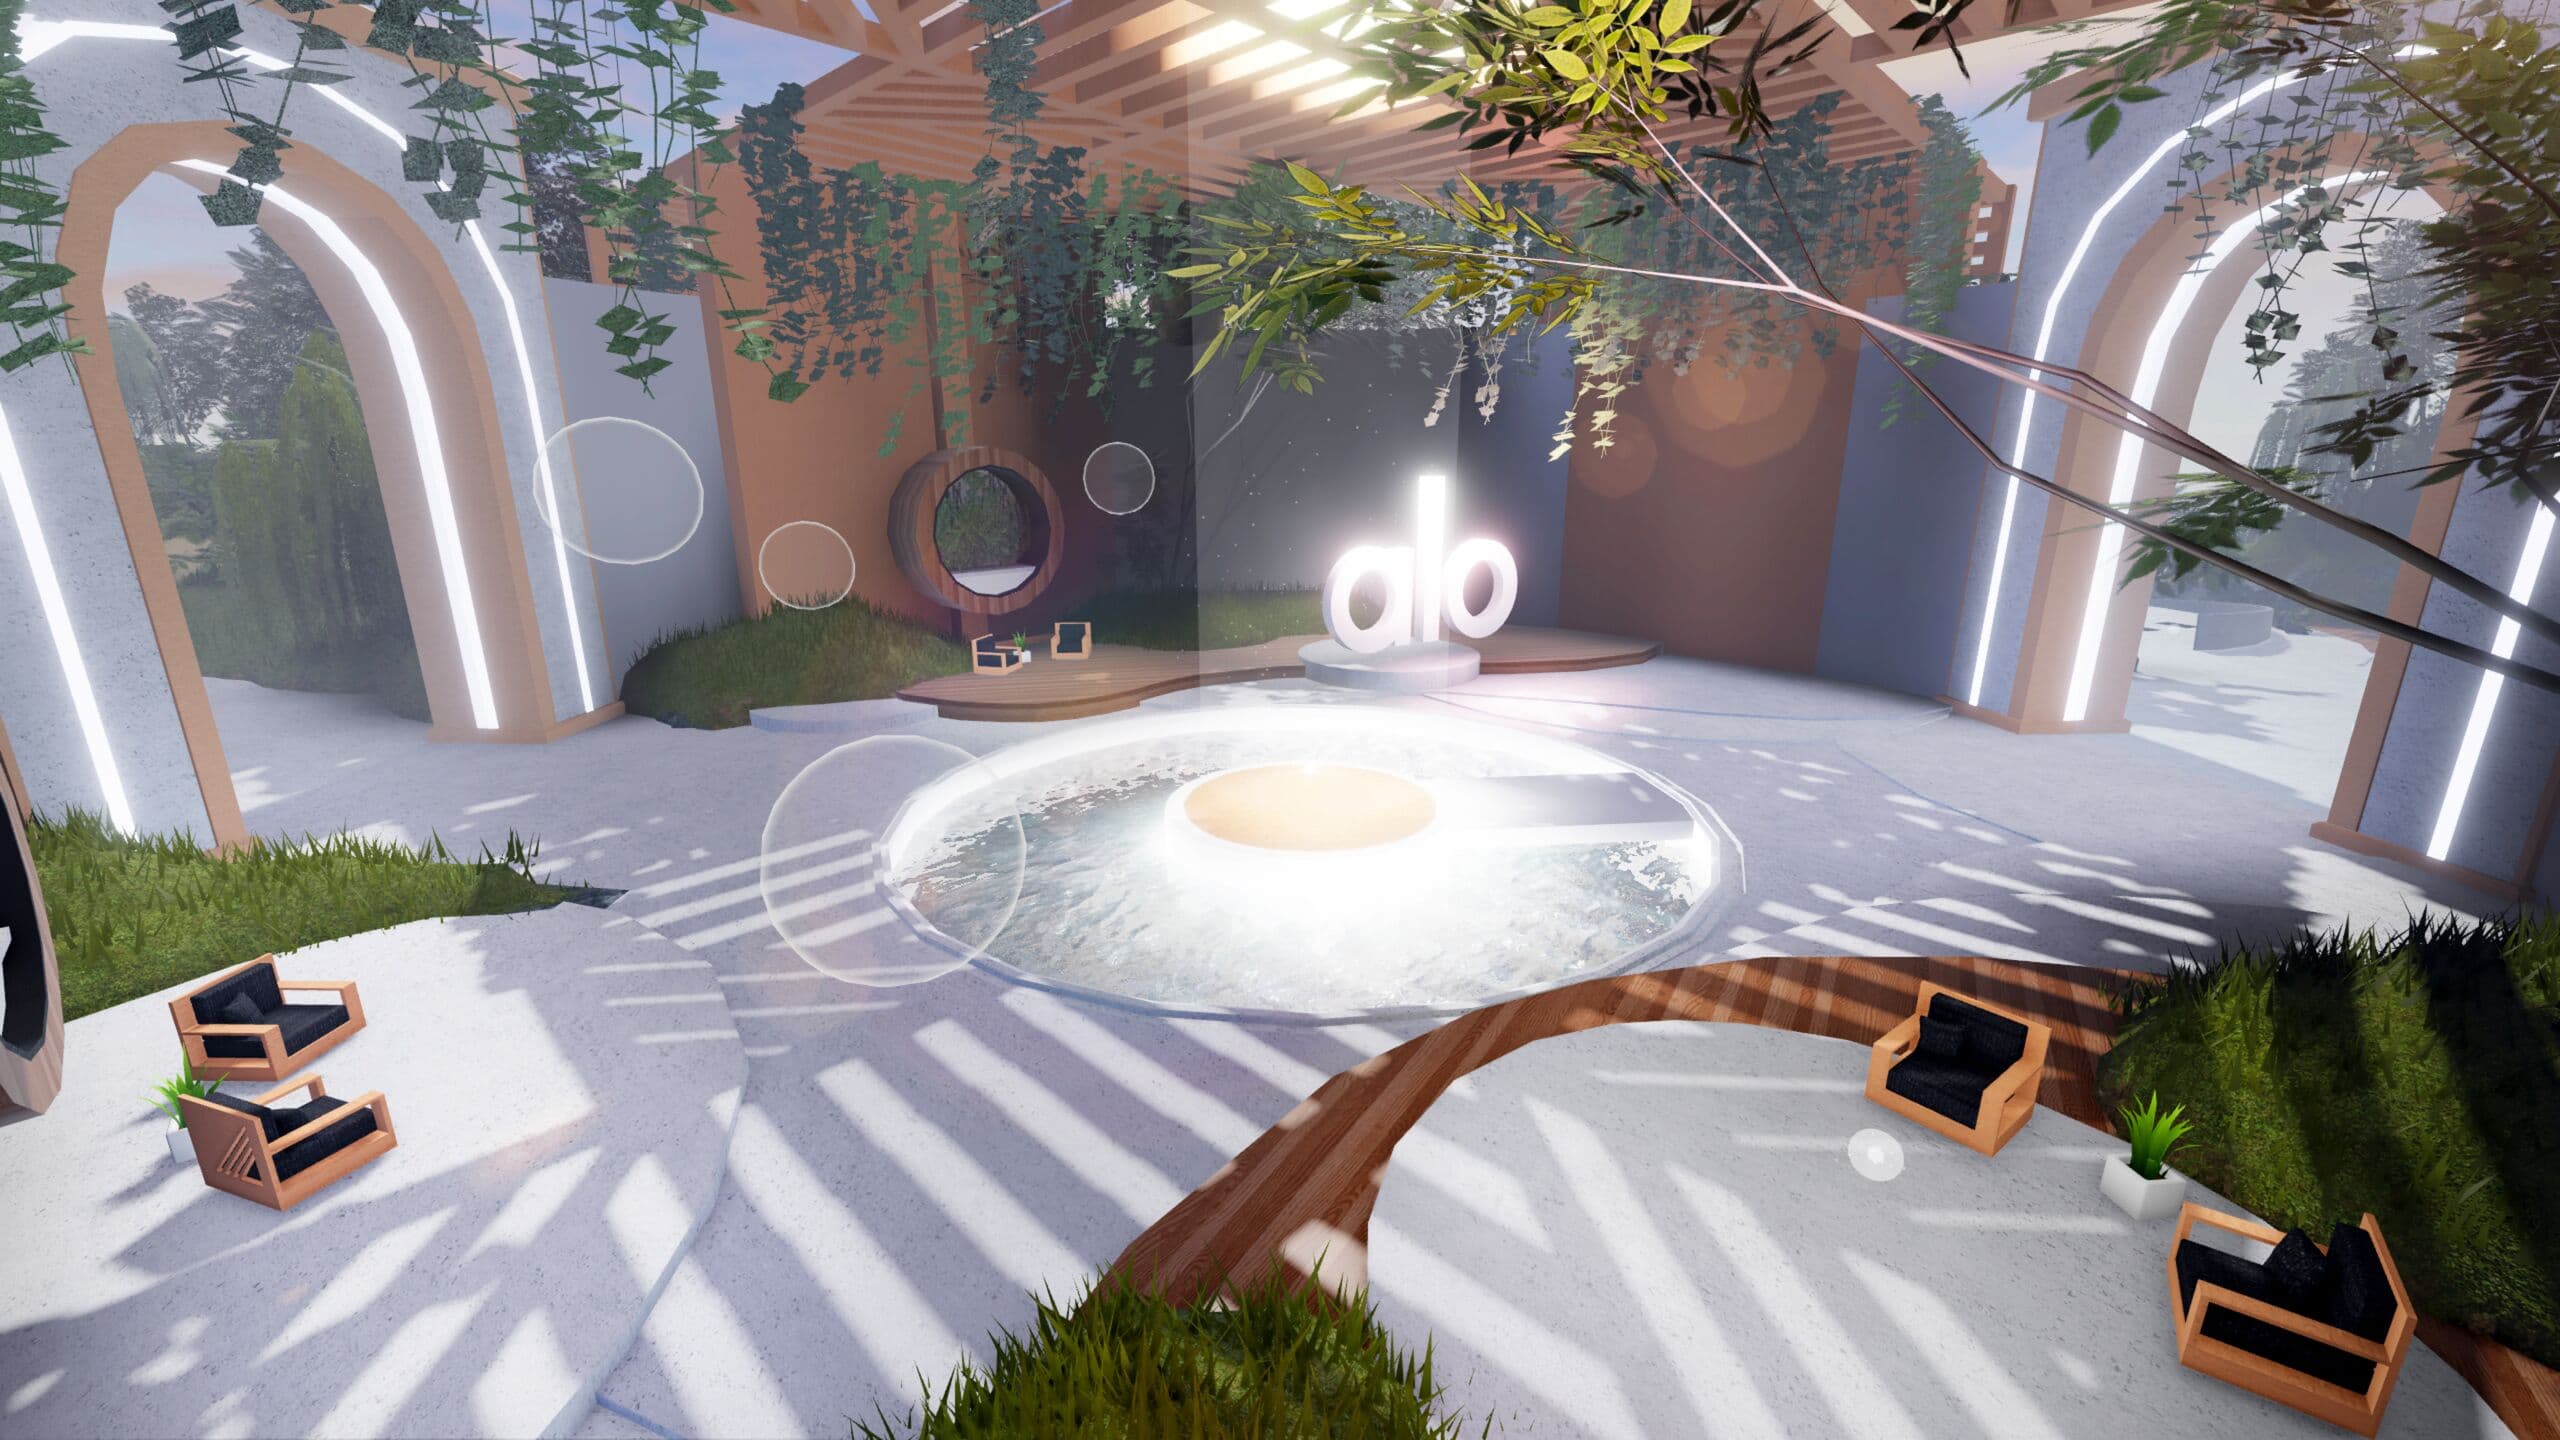 An aerial view of the meditation space in the Alo Sanctuary experience on Roblox featuring natural light, lots of greenery, and a center meditation area.  